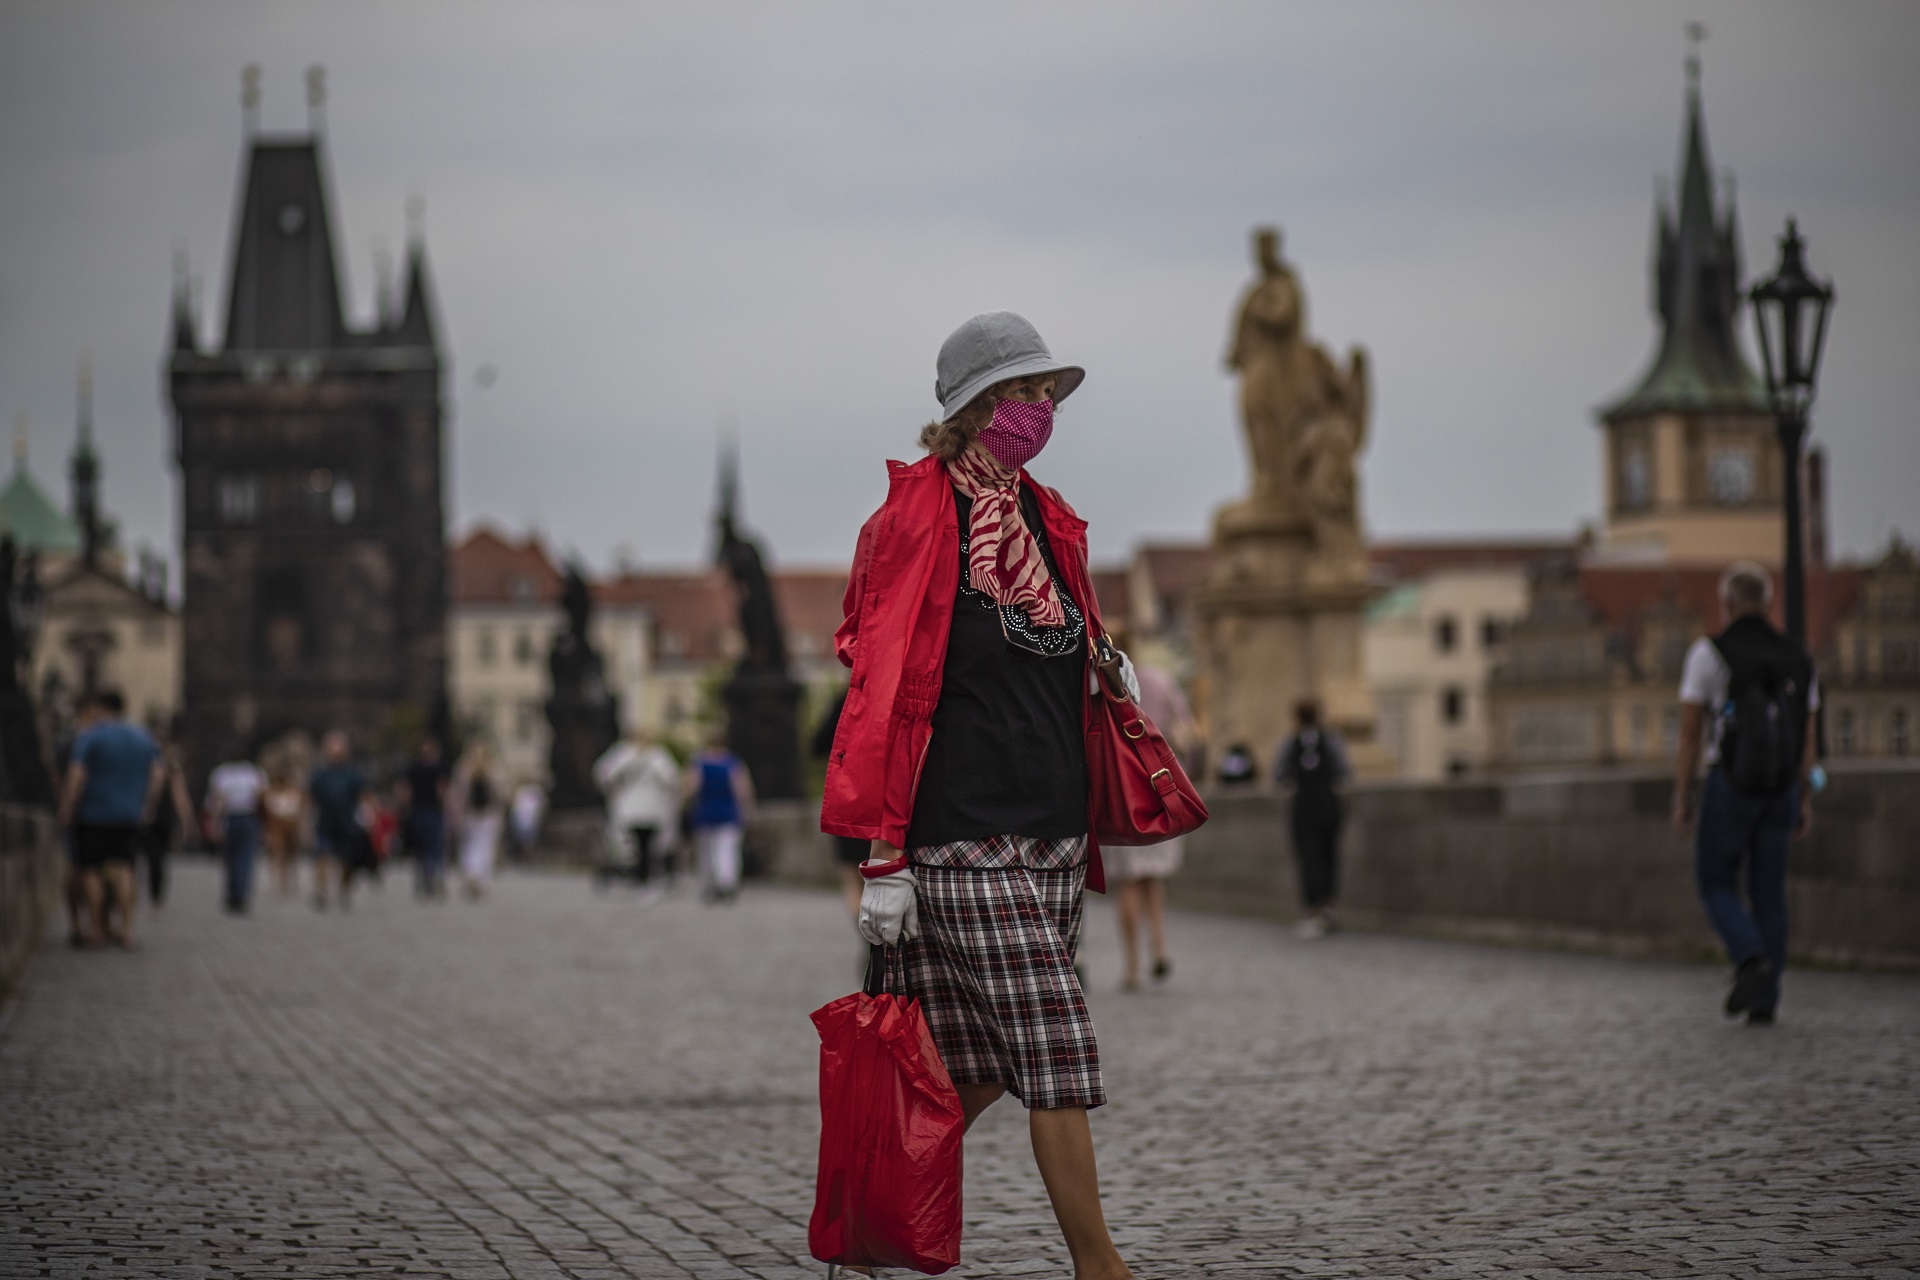 epa08691913 A woman wearing protective face mask walks on Charles Bridge in Prague, Czech Republic, 23 September 2020. Czech Republic had record rise in COVID-19 disease caused by the SARS-CoV-2 coronavirus from last week as country has second highest increase in Europe, after Spain.  EPA/MARTIN DIVISEK  EPA-EFE/MARTIN DIVISEK